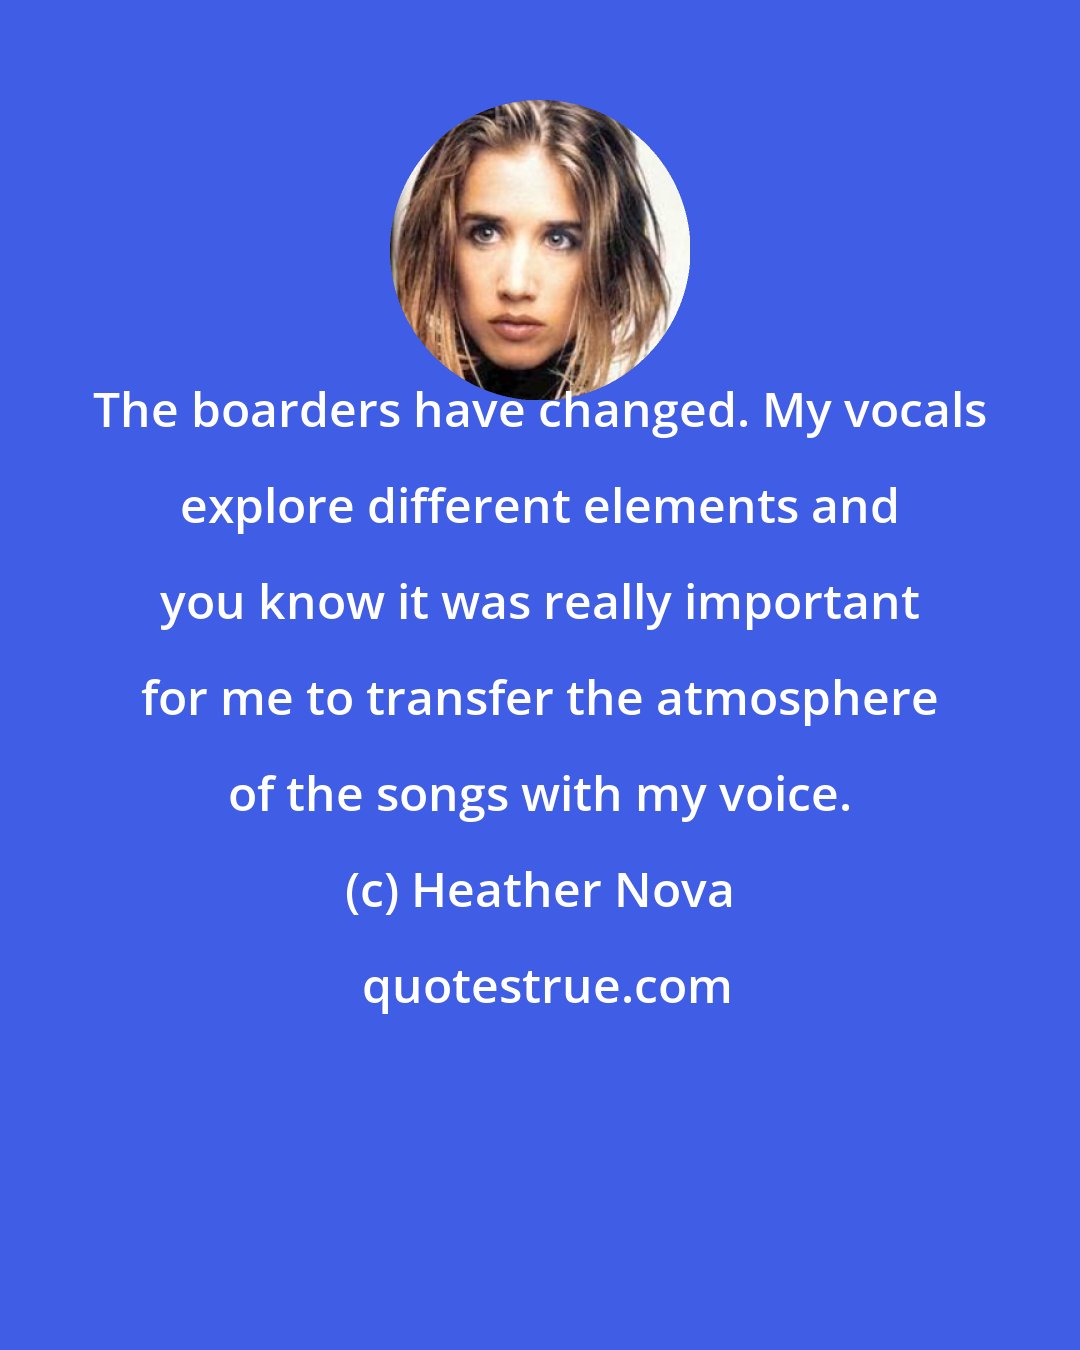 Heather Nova: The boarders have changed. My vocals explore different elements and you know it was really important for me to transfer the atmosphere of the songs with my voice.